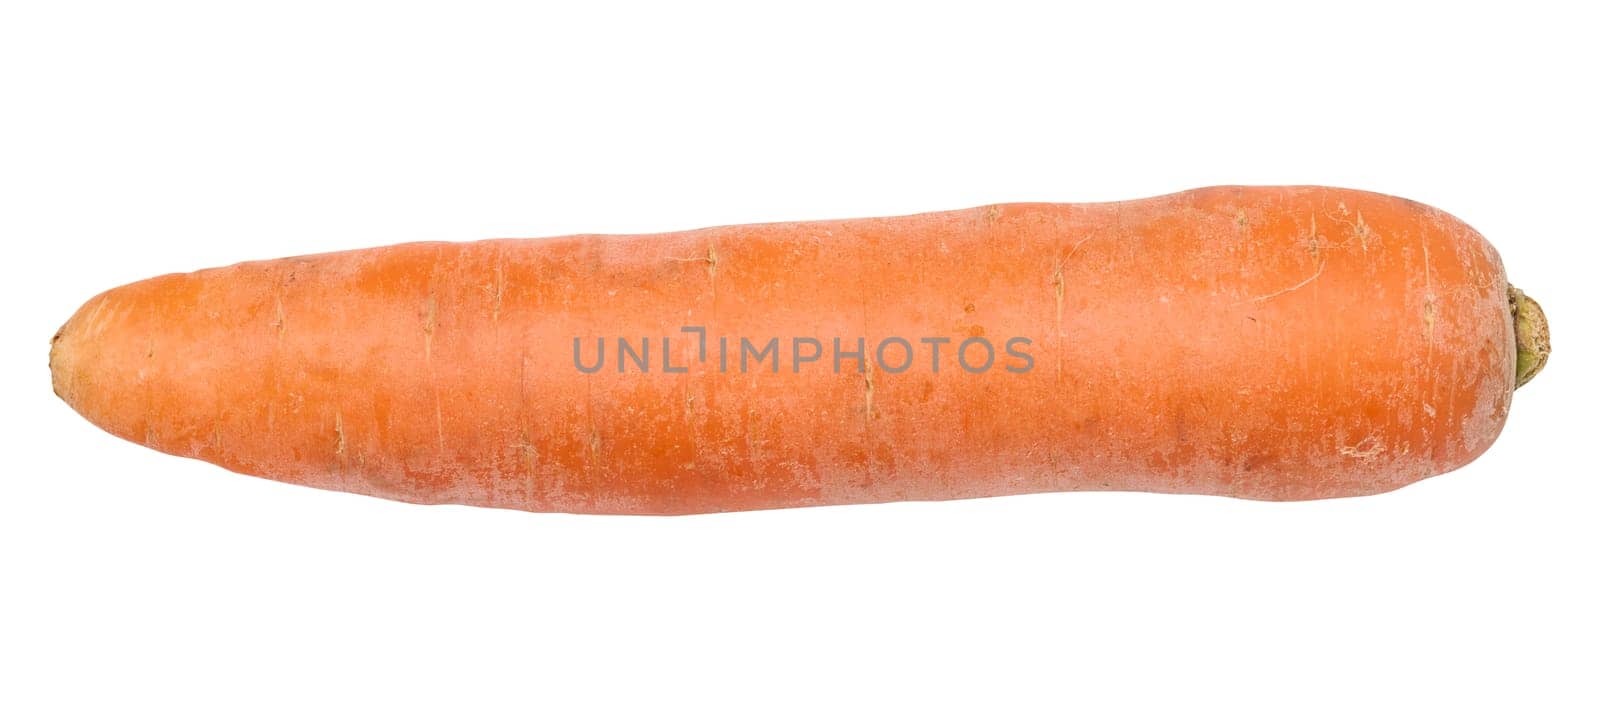 Whole raw carrot on white isolated background by ndanko